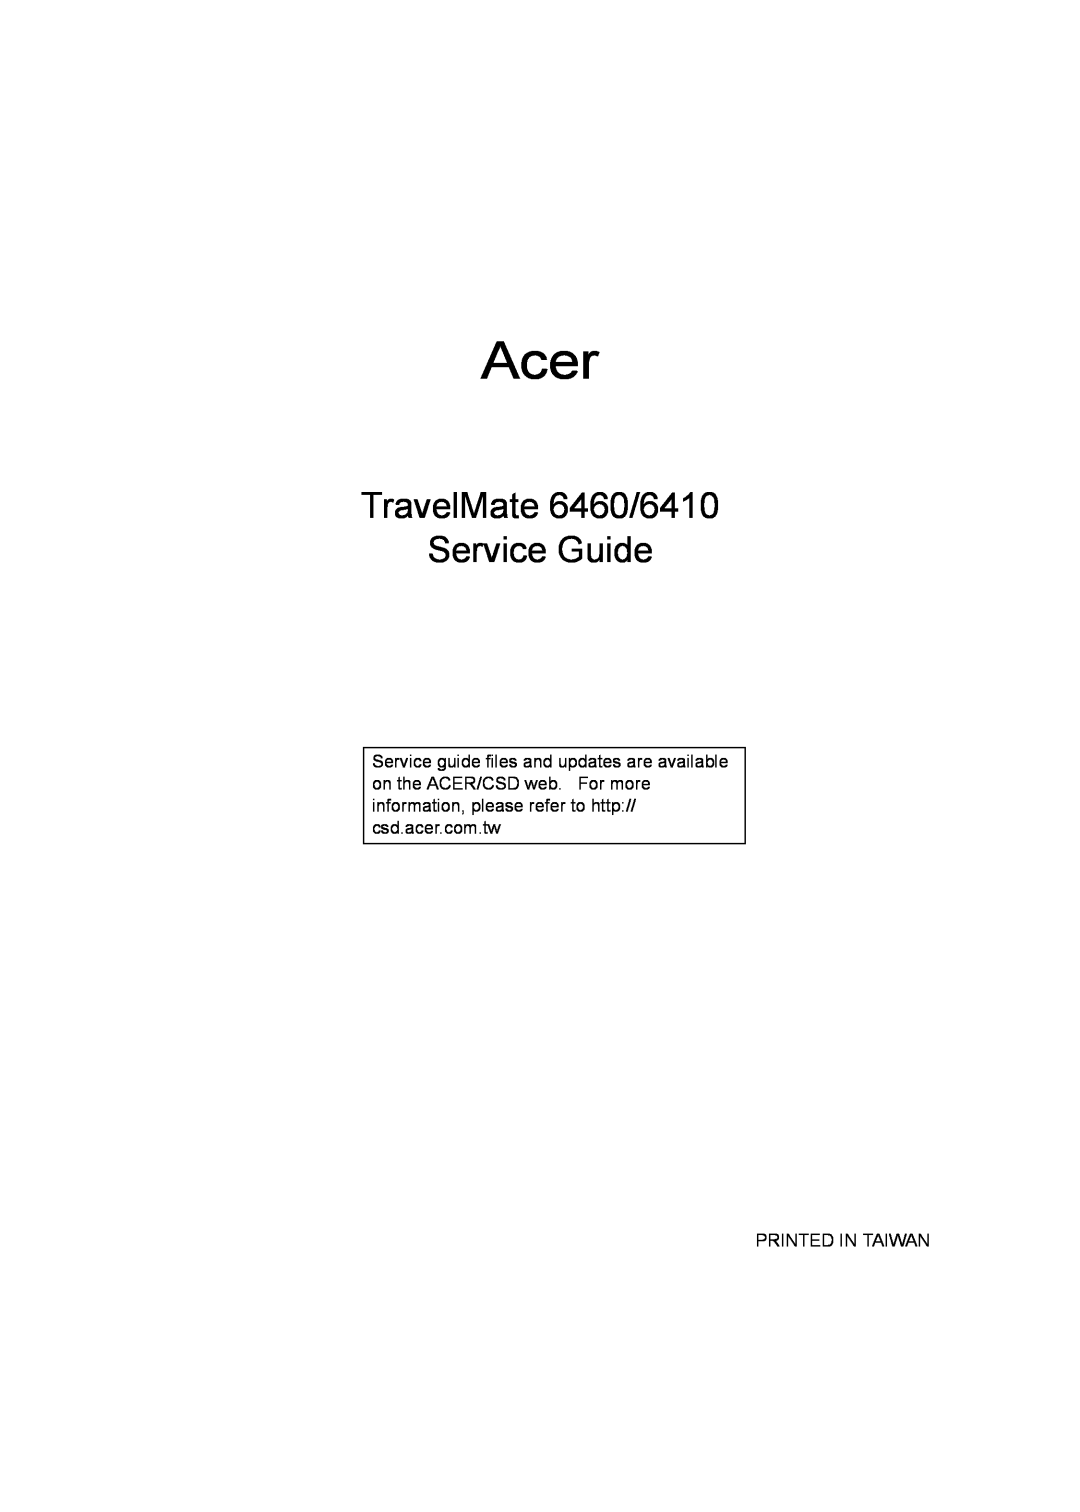 Acer manual TravelMate 6460/6410 Service Guide, Acer 